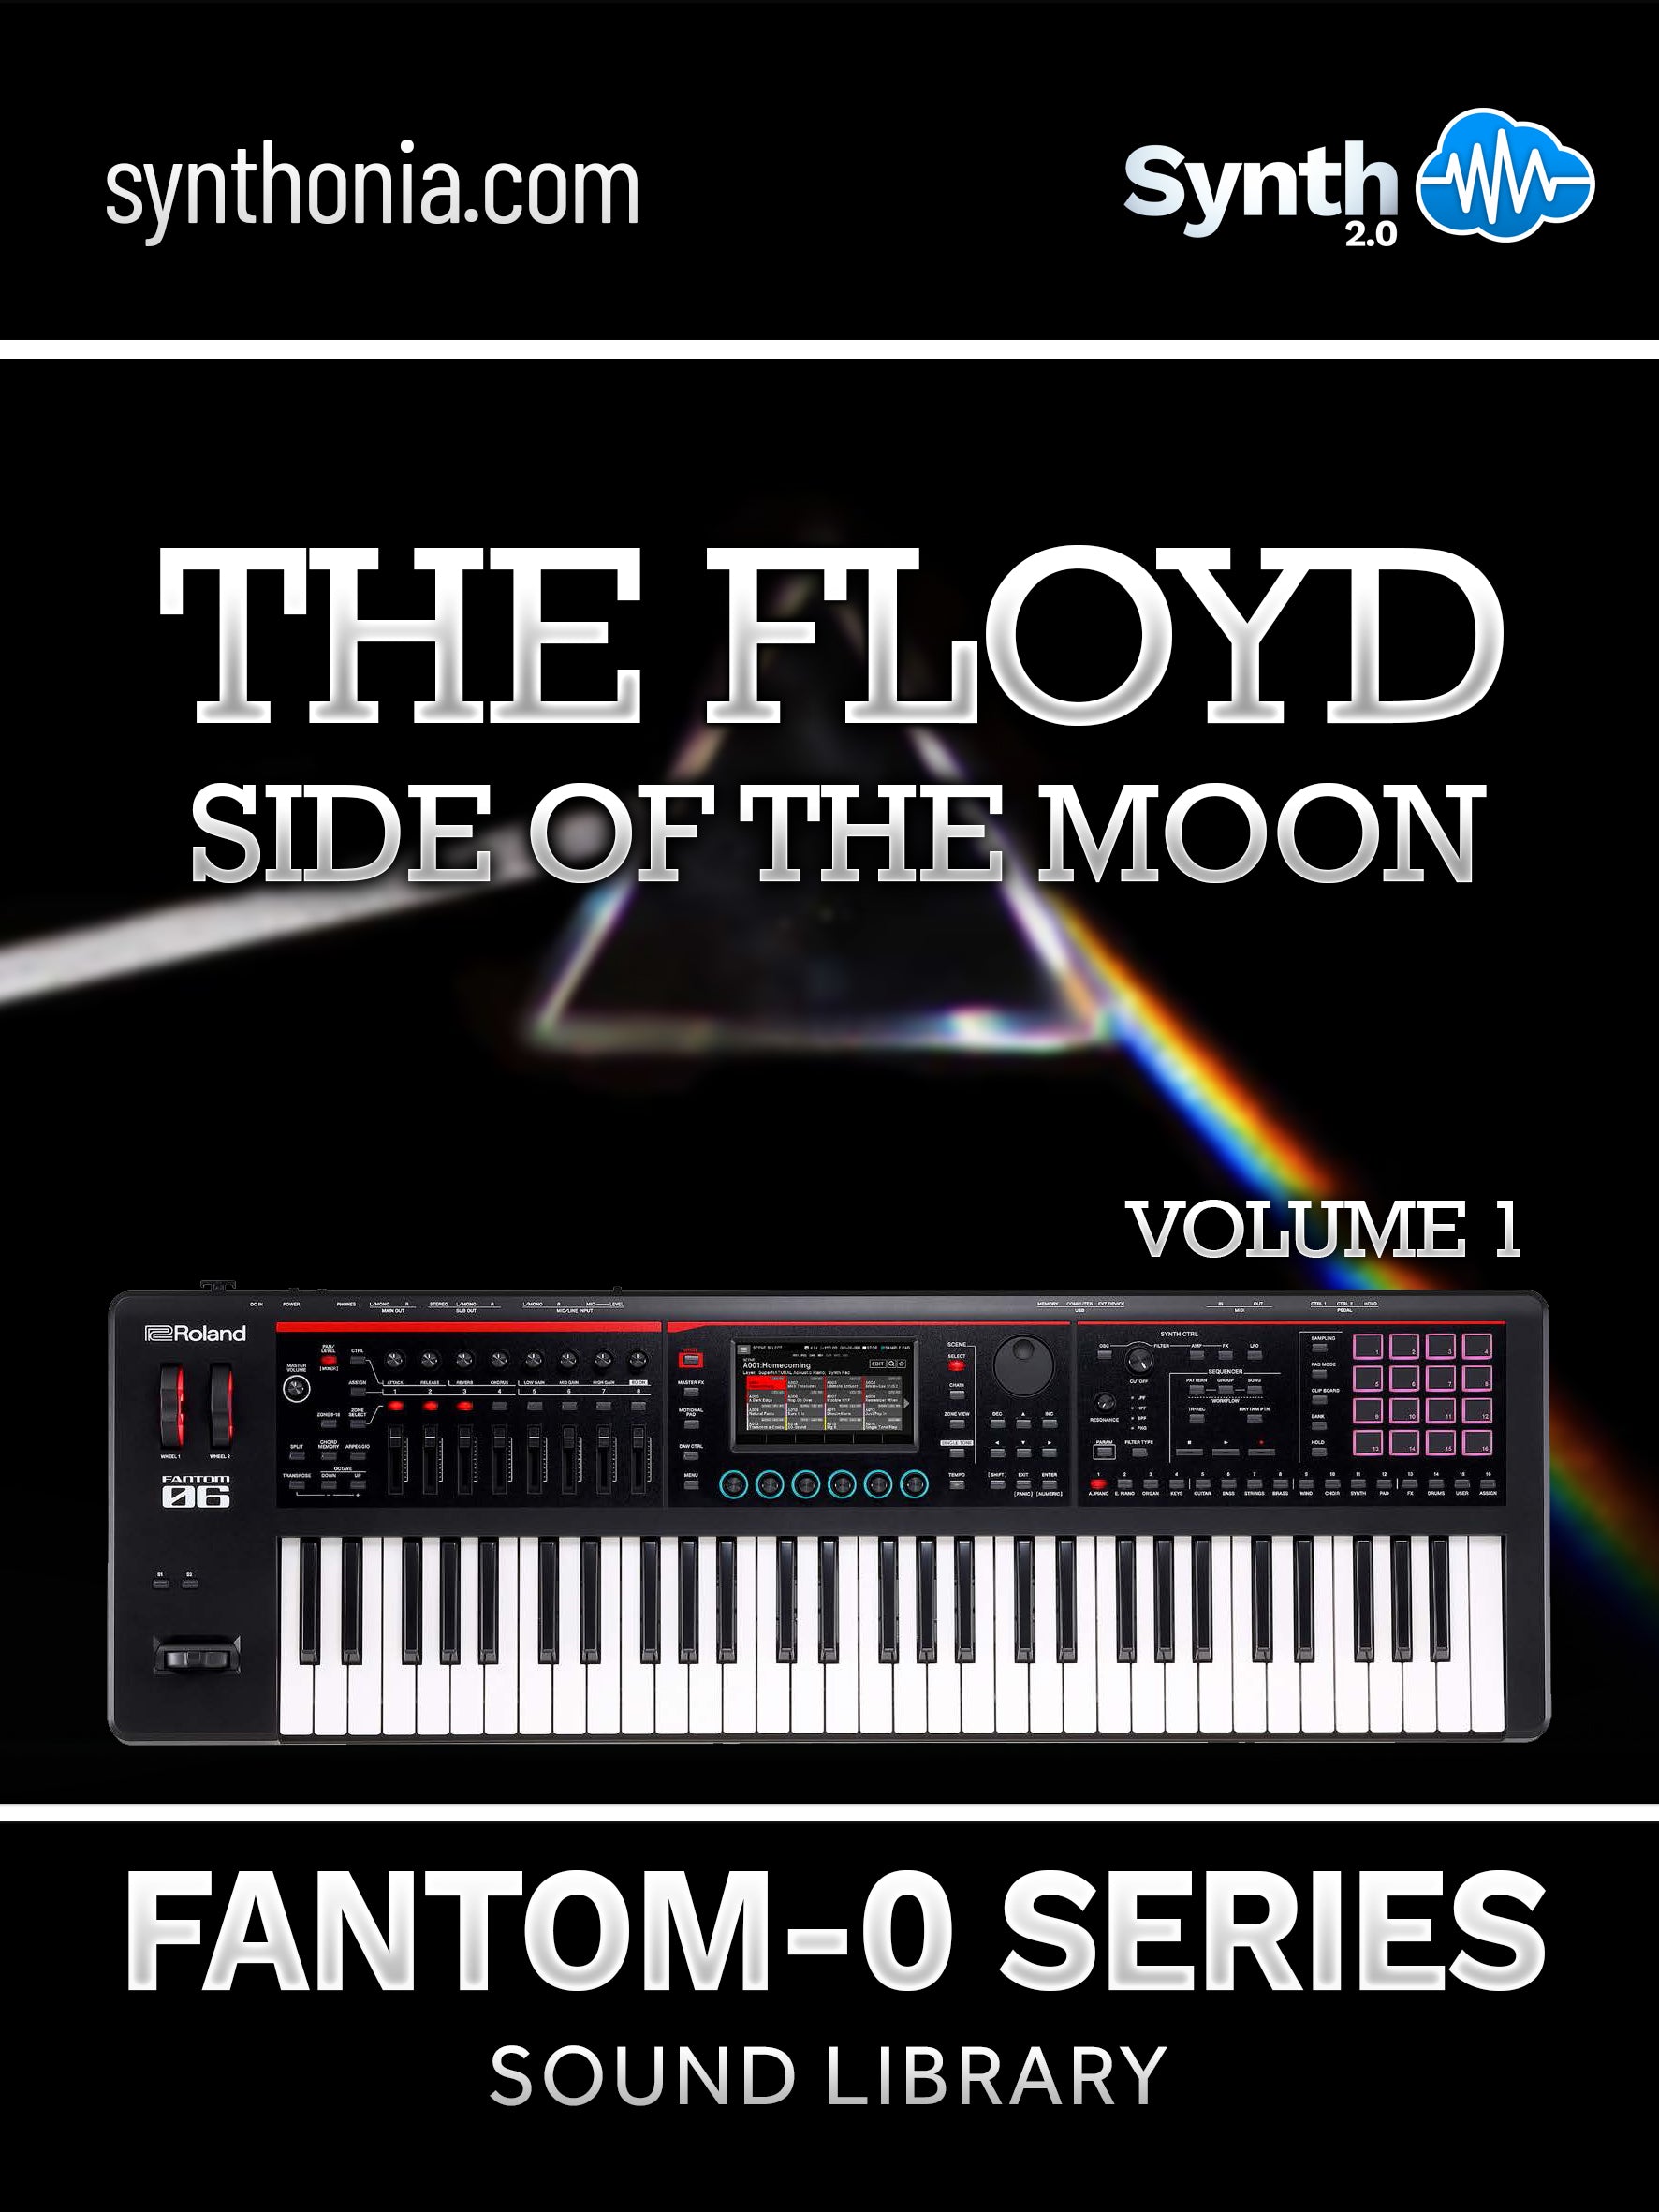 SCL483 - The Floyd Side Of The Moon Vol.1 - Fantom-0 ( Over 50 Tones - 15 Scenes )